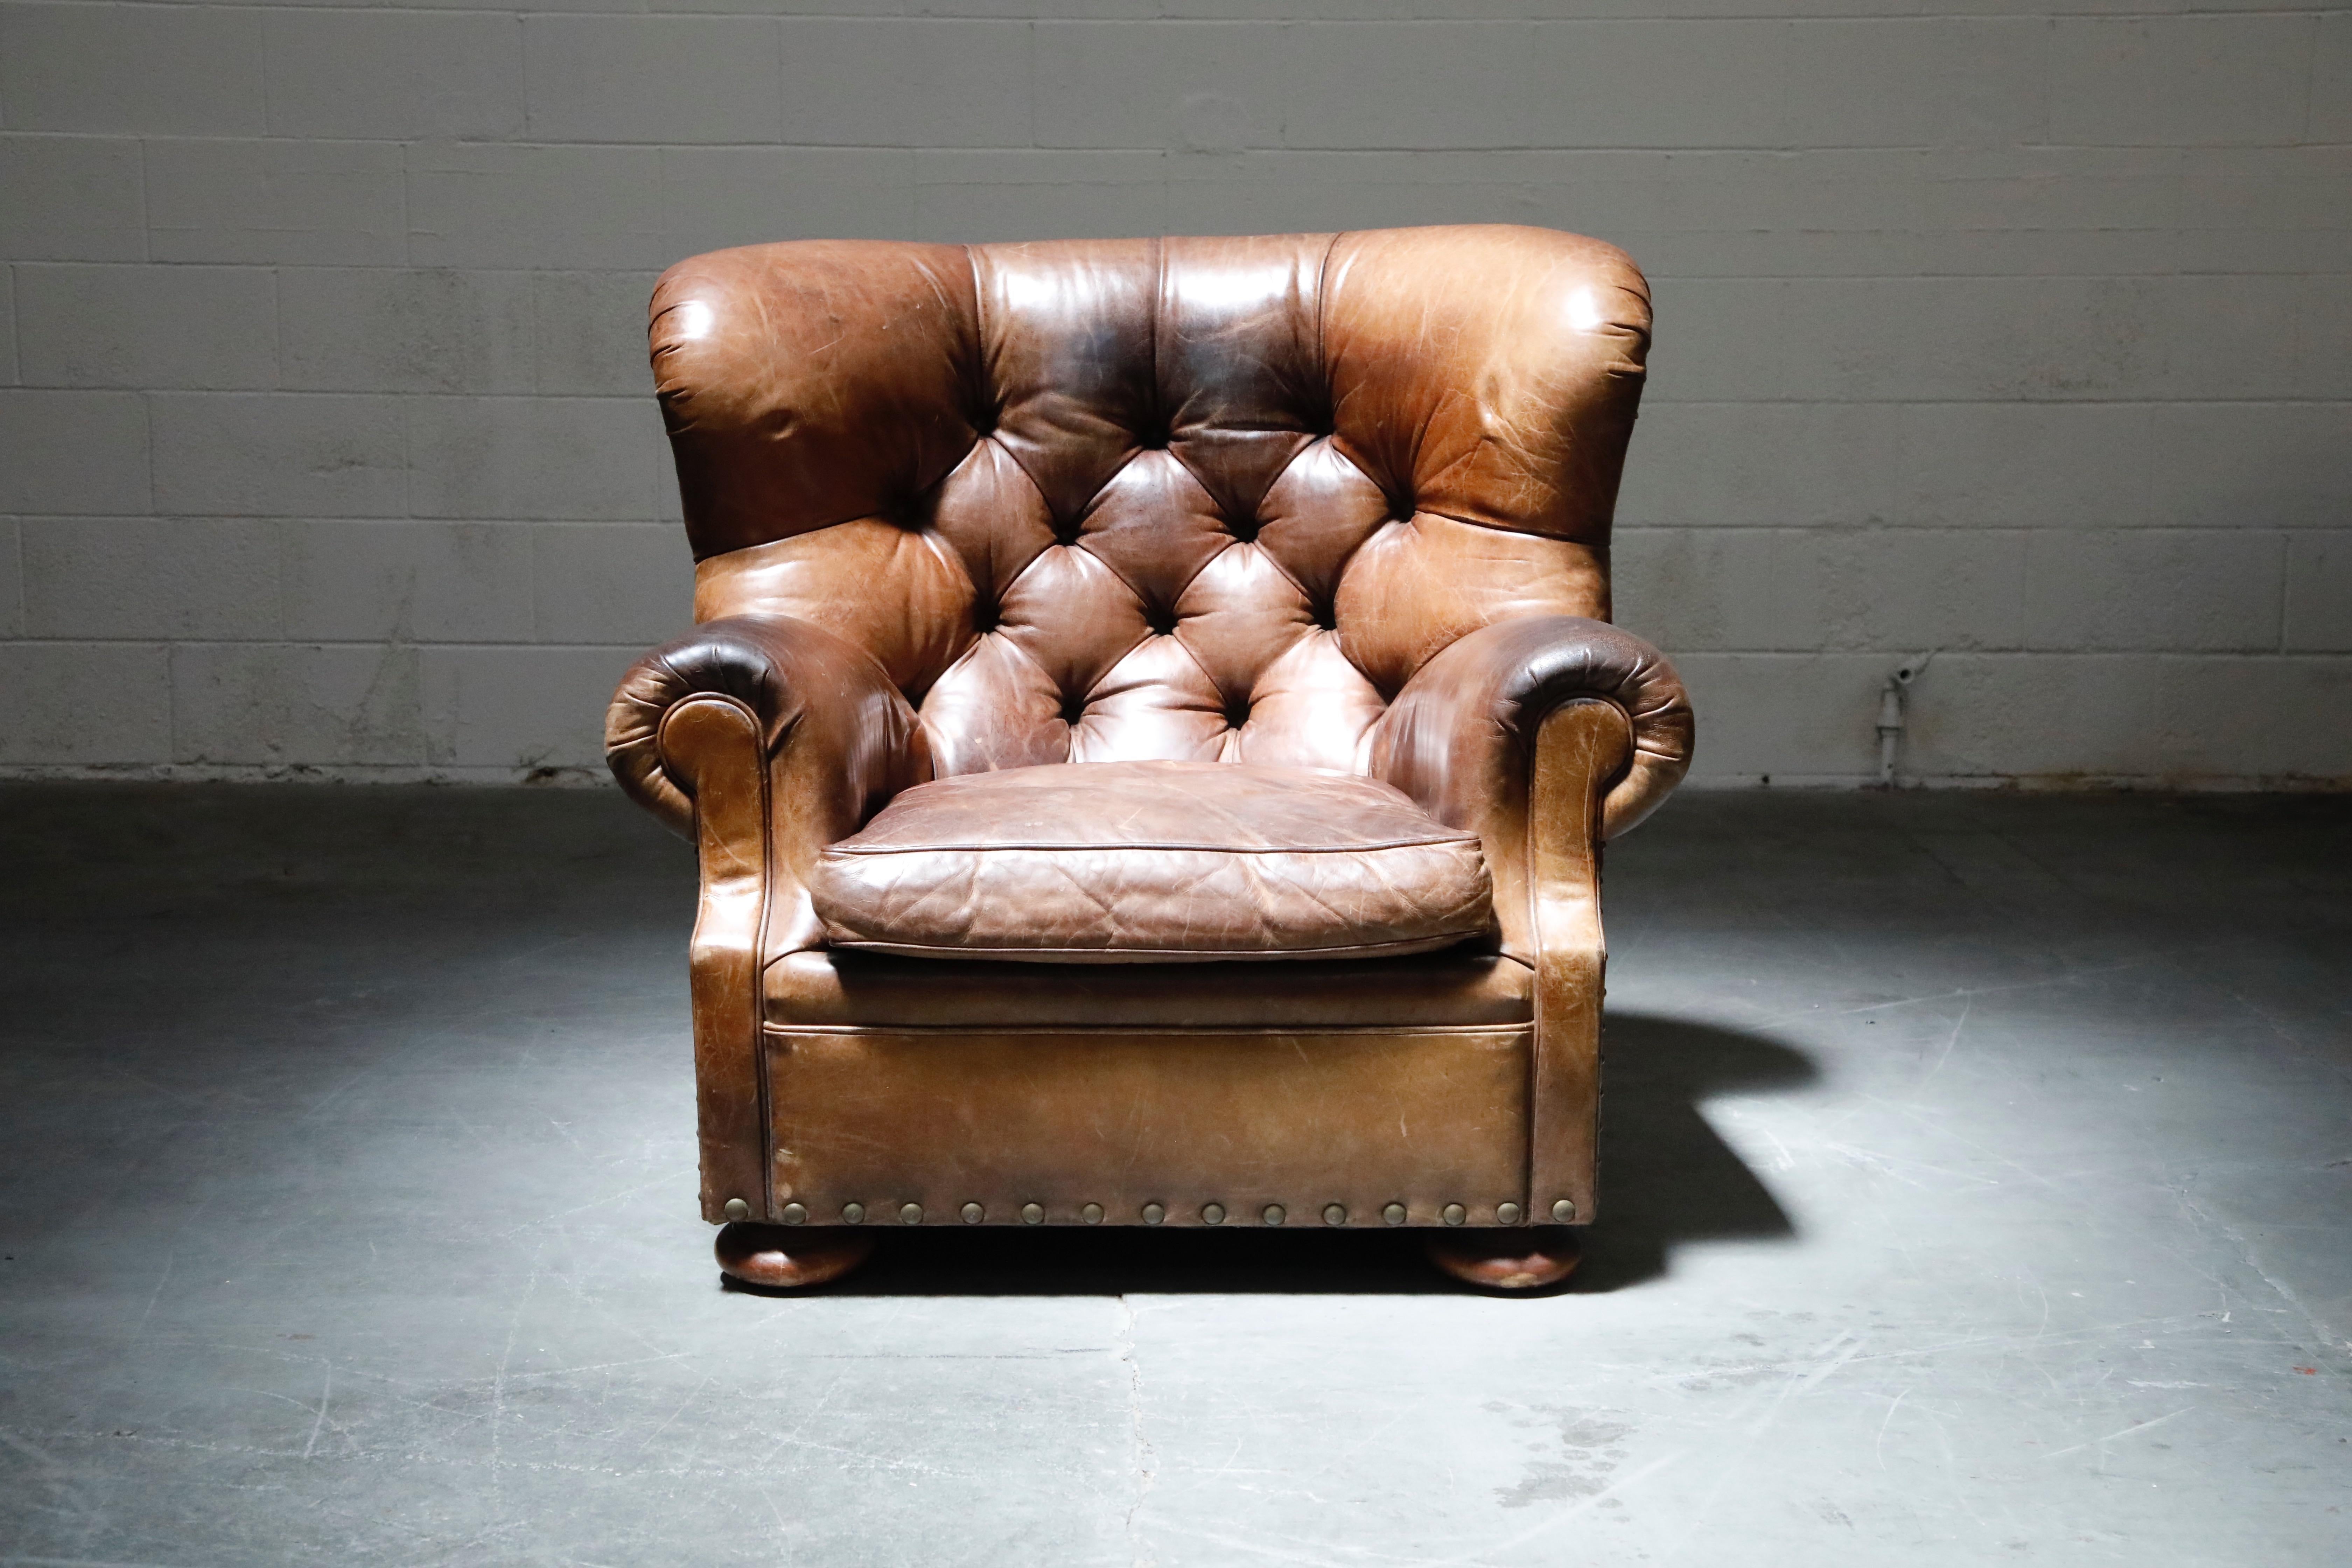 This Ralph Lauren labelled 'Writers' wingback club chair has such incredible lightly distressed and moderately patinated leather, very thick and quality natural hides were used in it's making. The striking large scale wingback silhouette is iconic,